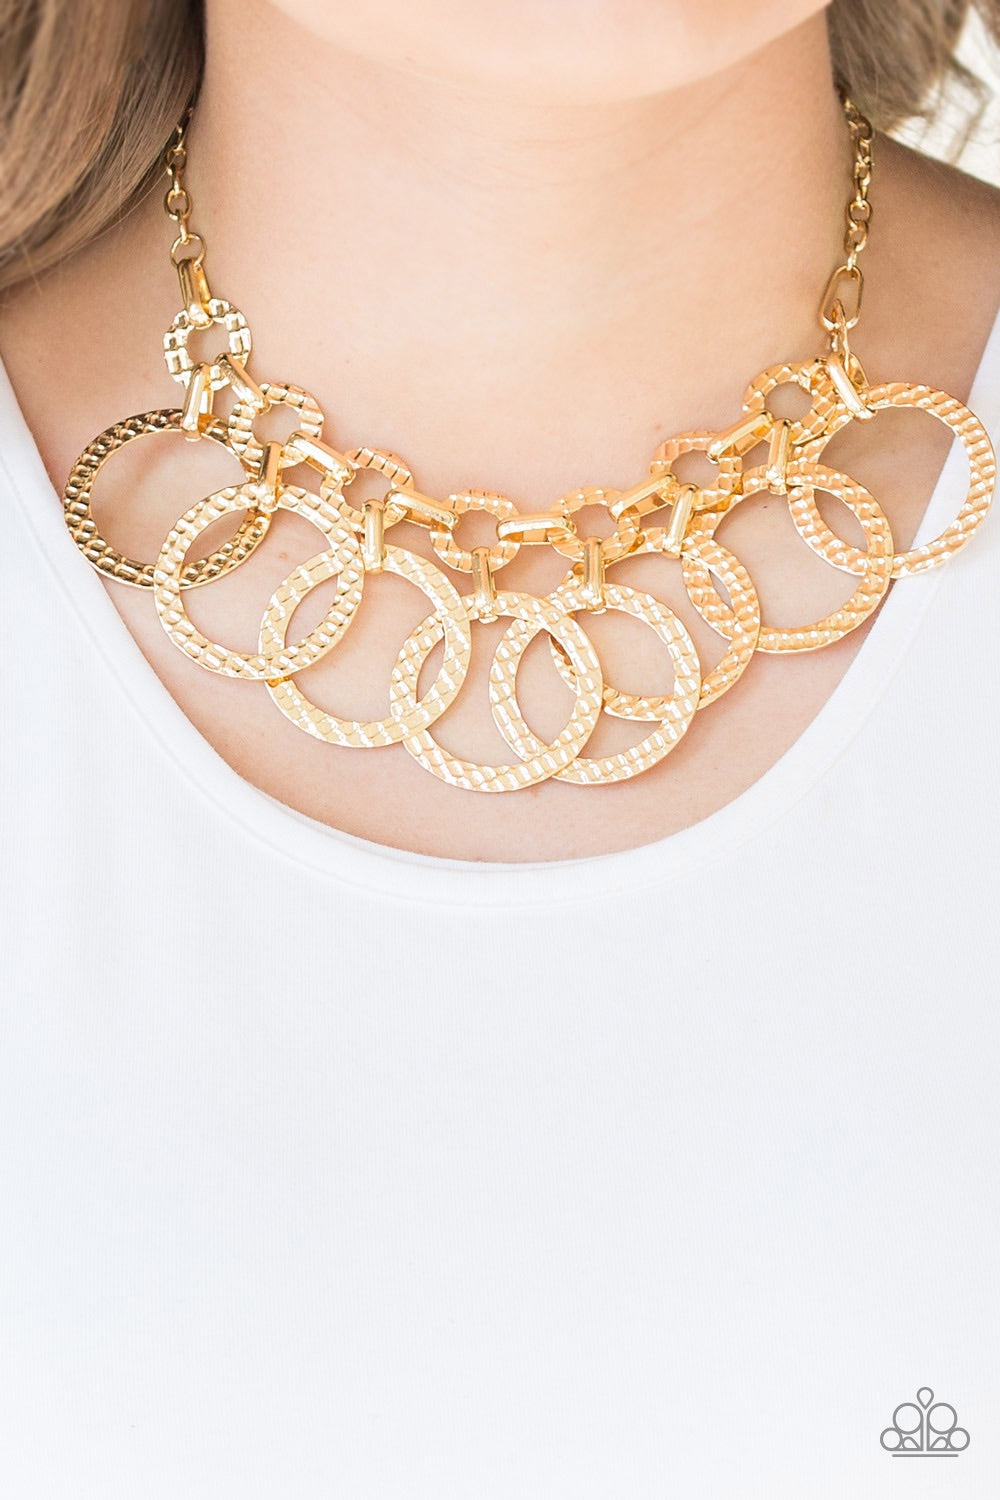 Jammin’ Jungle Gold-Necklace